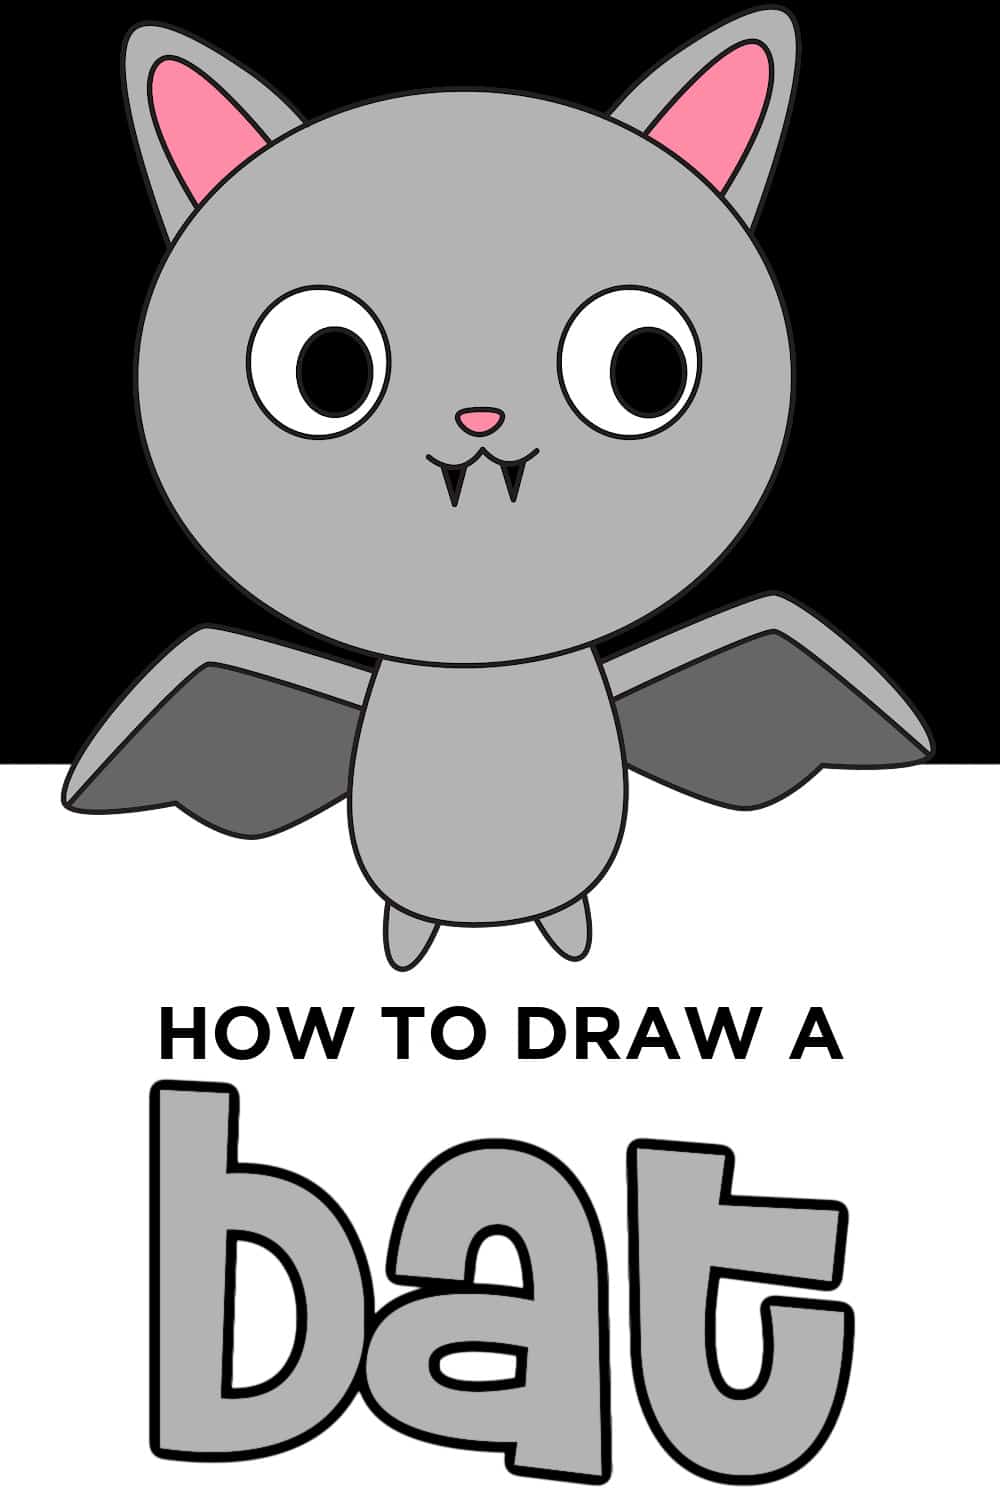 Cute bat drawing - for kids Get ready to work on this super cute bat drawing  tutorial! Perfect with these easy step-by-step instructions that will have  you drawing adorable bats in no